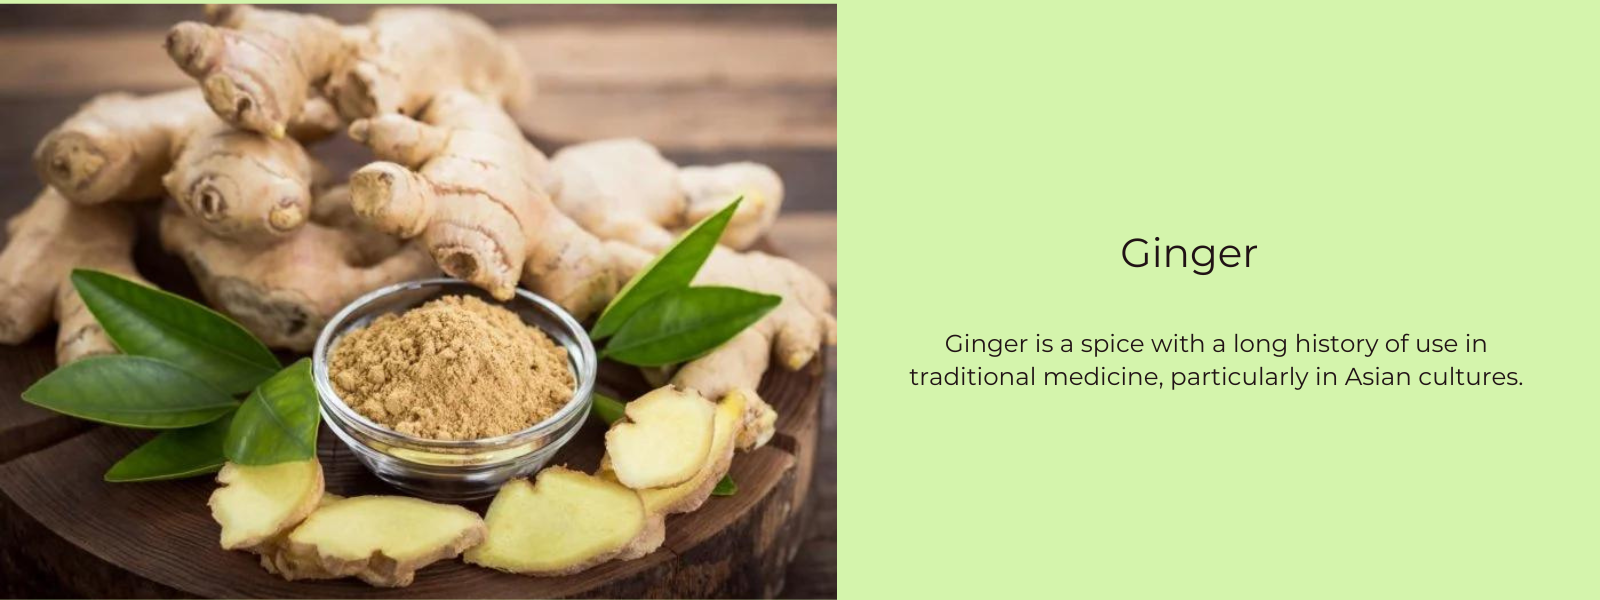 Ginger - Health Benefits, Uses and Important Facts